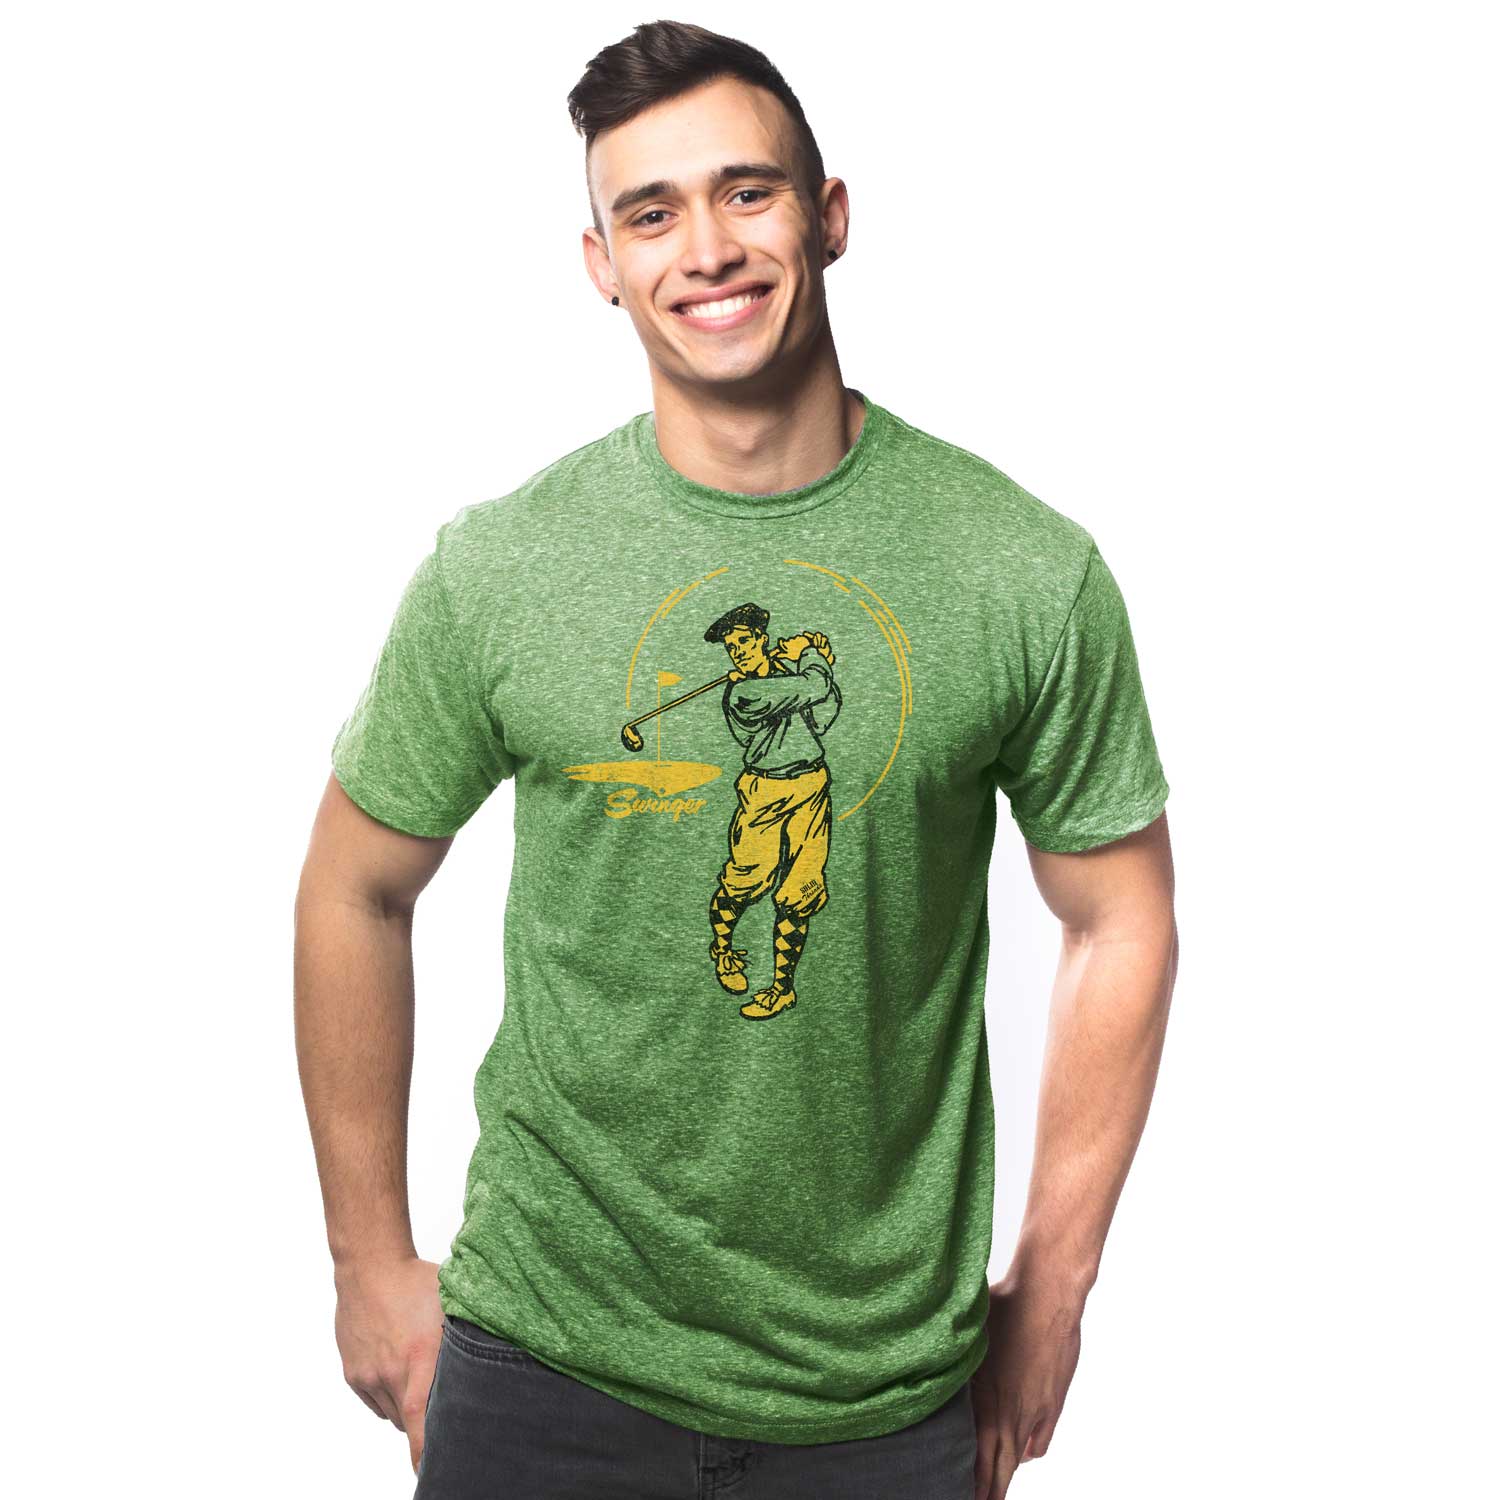 Men's Swinger Vintage Inspired T-shirt | Cool Funny Sports Retro Golfing Graphic Tee | Solid Threads